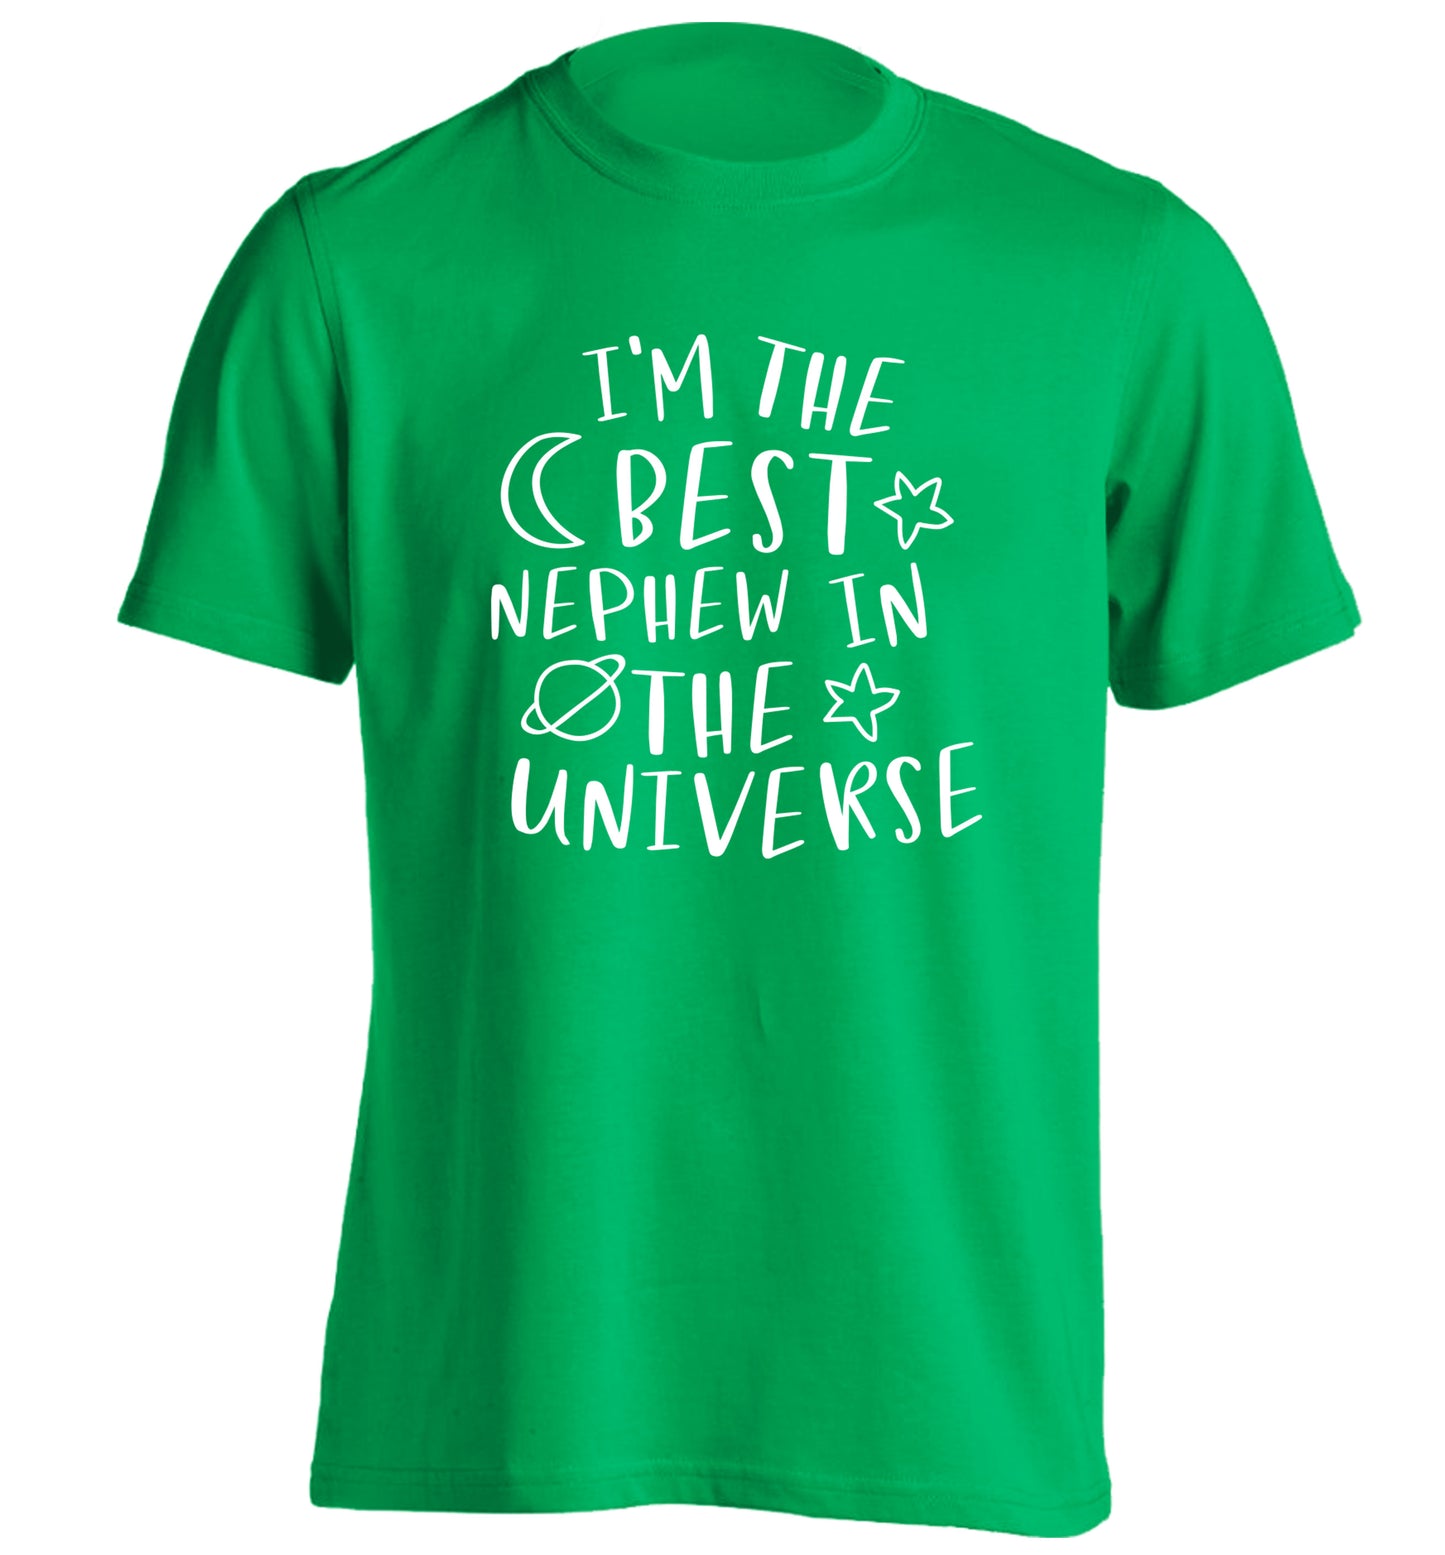 I'm the best nephew in the universe adults unisex green Tshirt 2XL